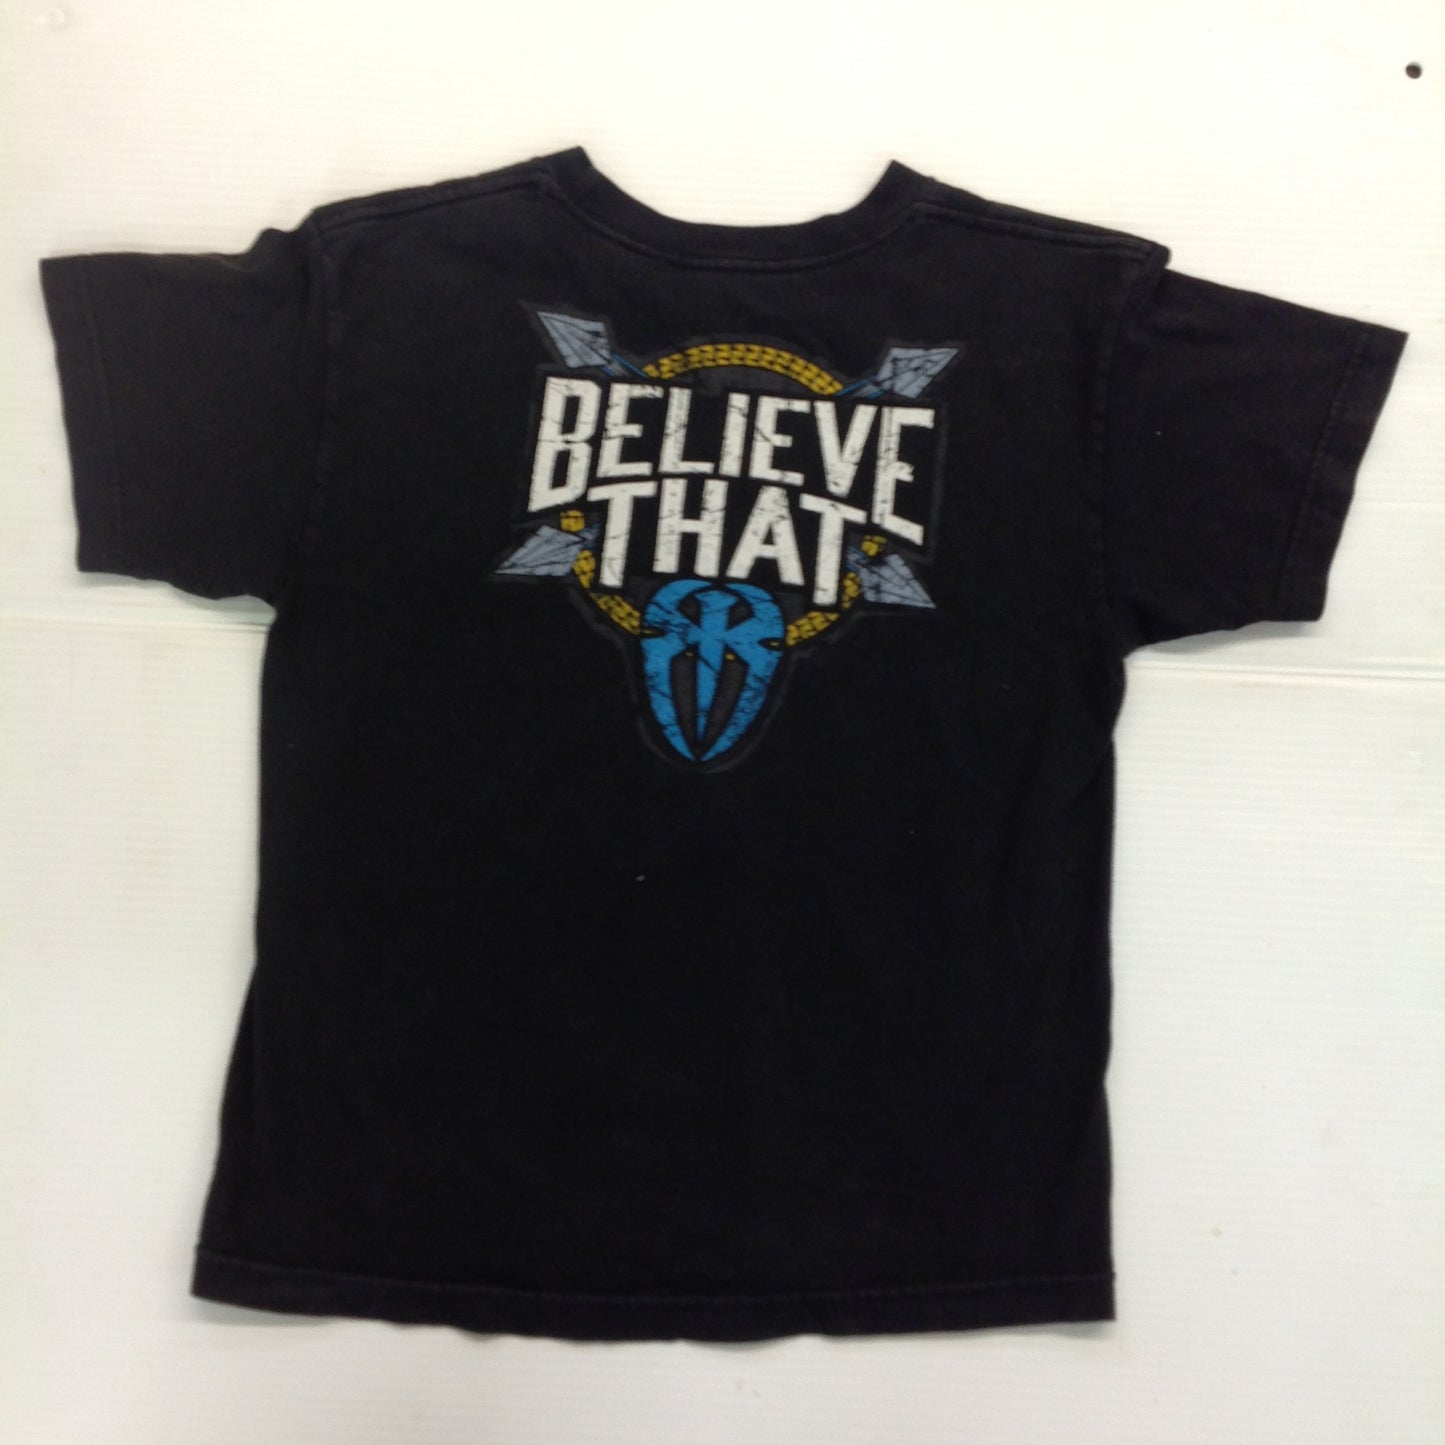 2018 WWE WWF Authentic Youth Medium Black T-Shirt Roman Empire Spare No One Spear Everyone Believe That